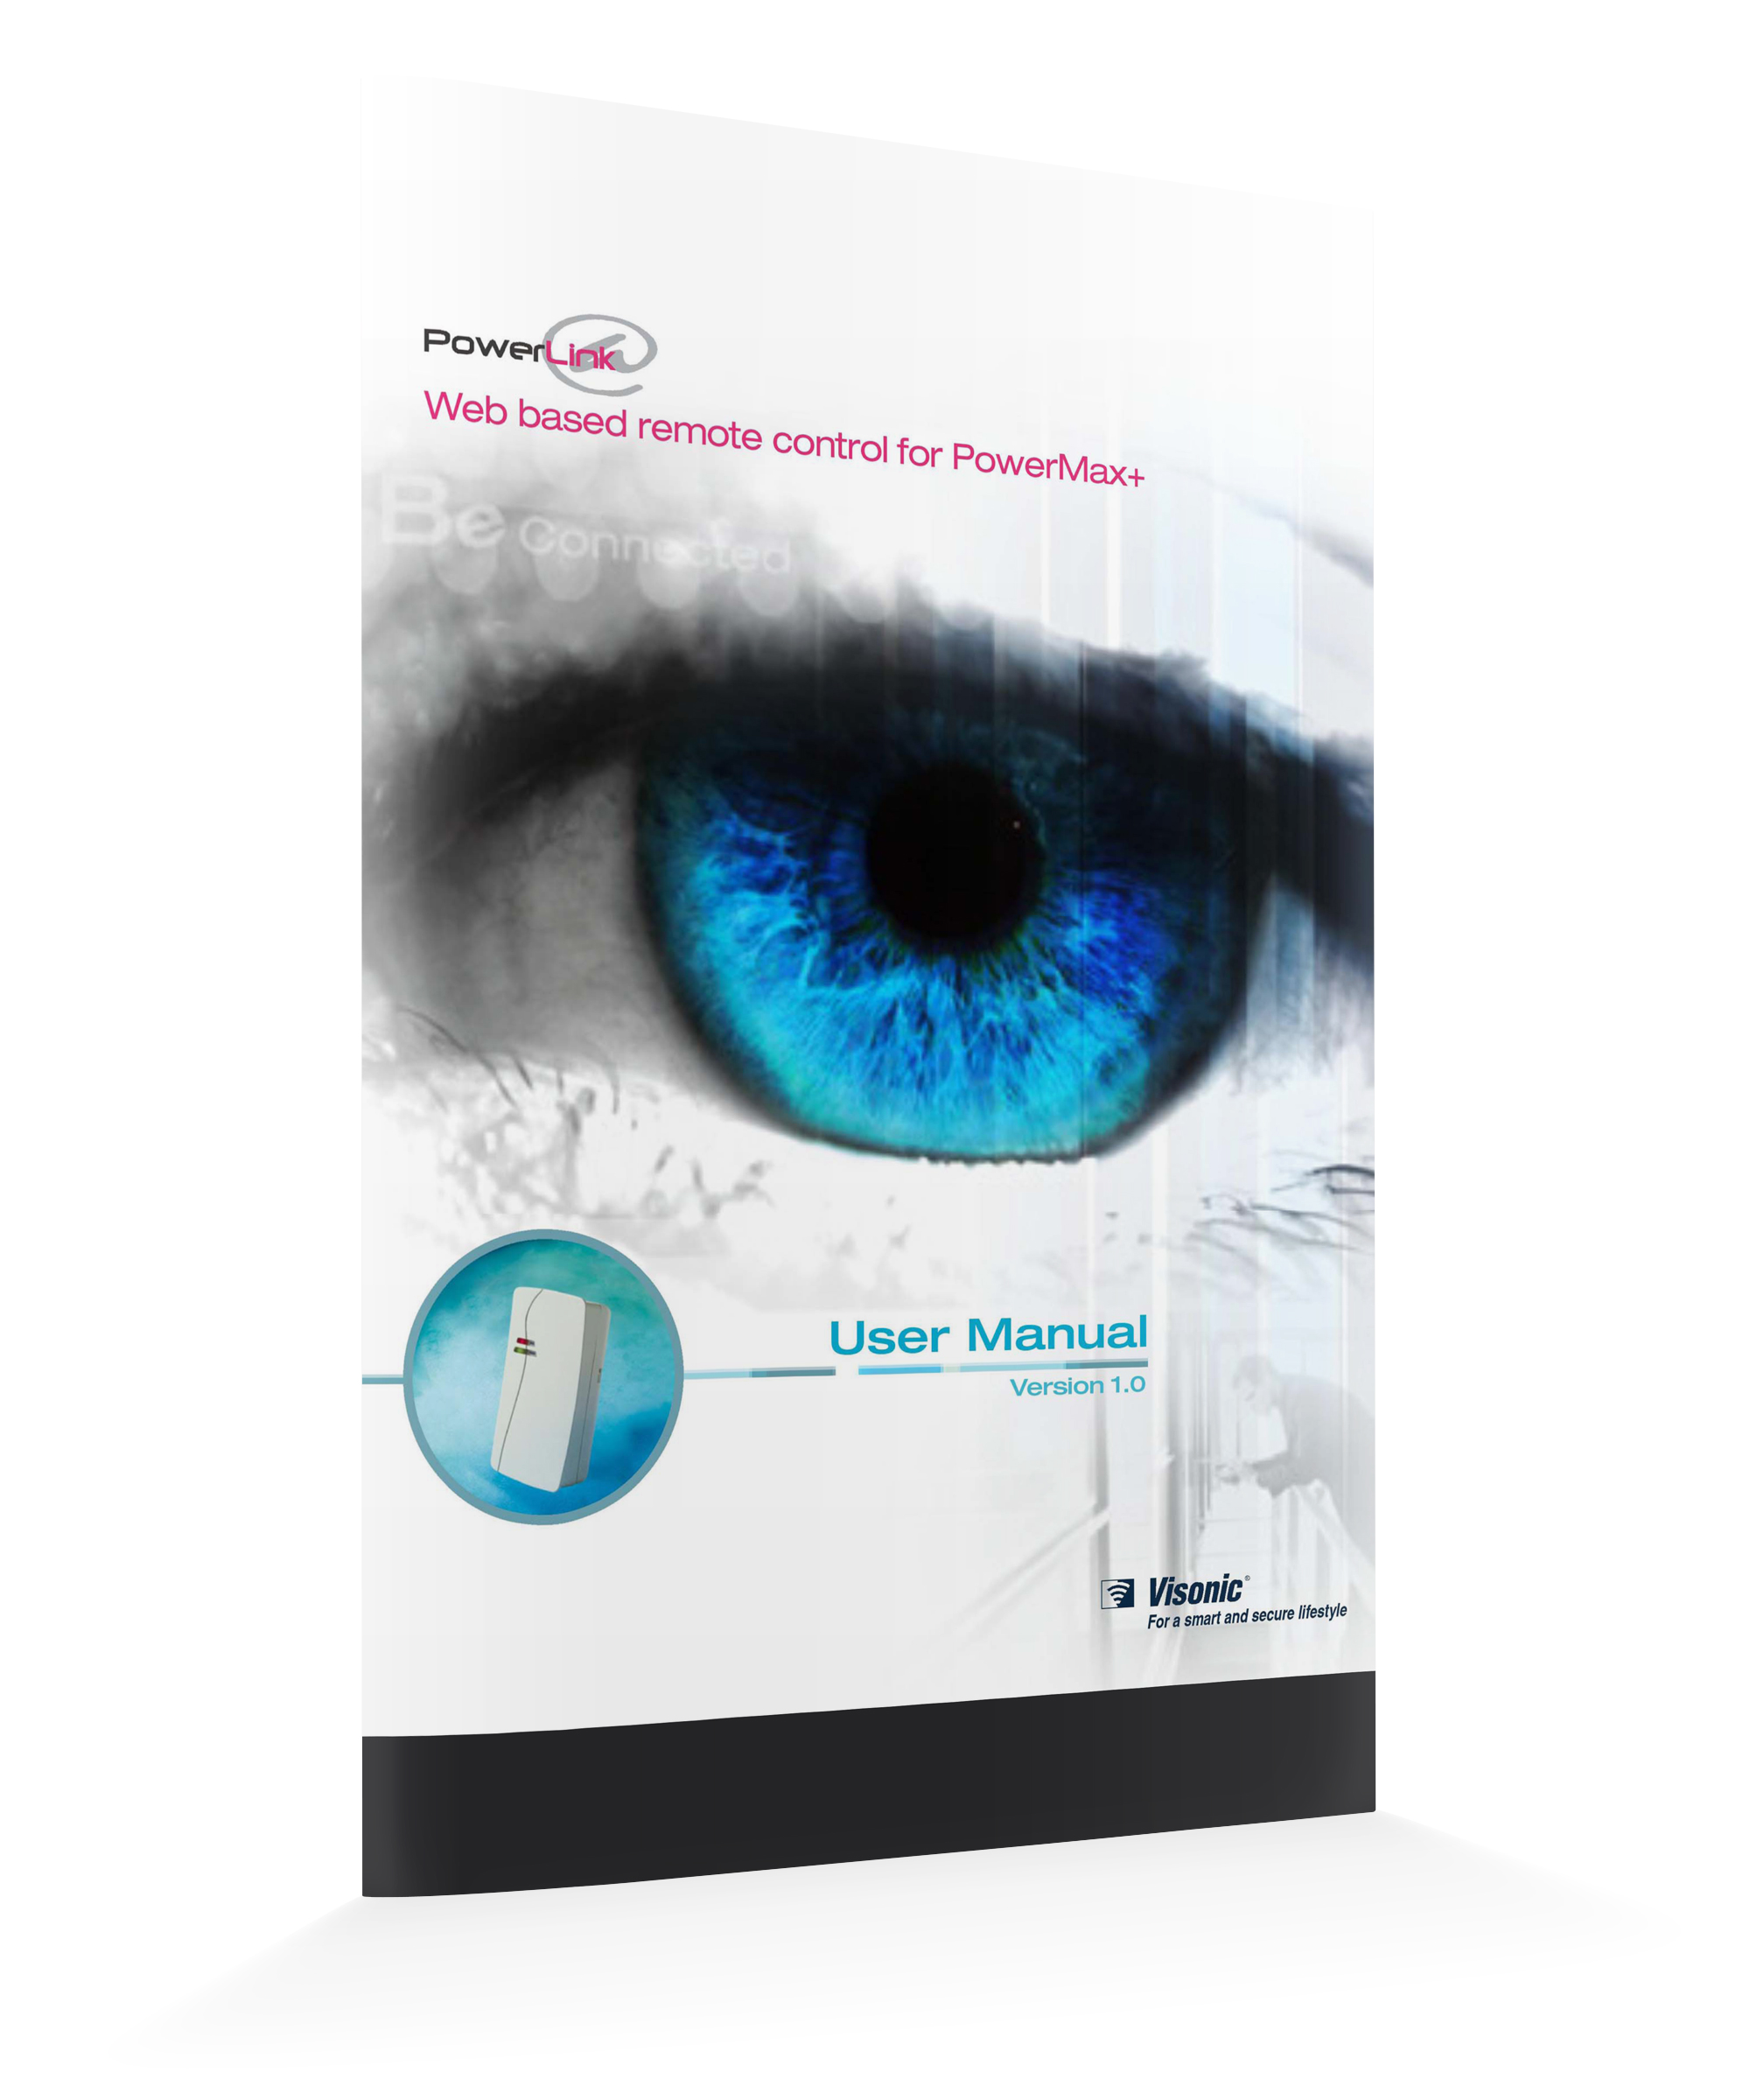 PowerLink User Manual – Both in Interactive and Print Applications